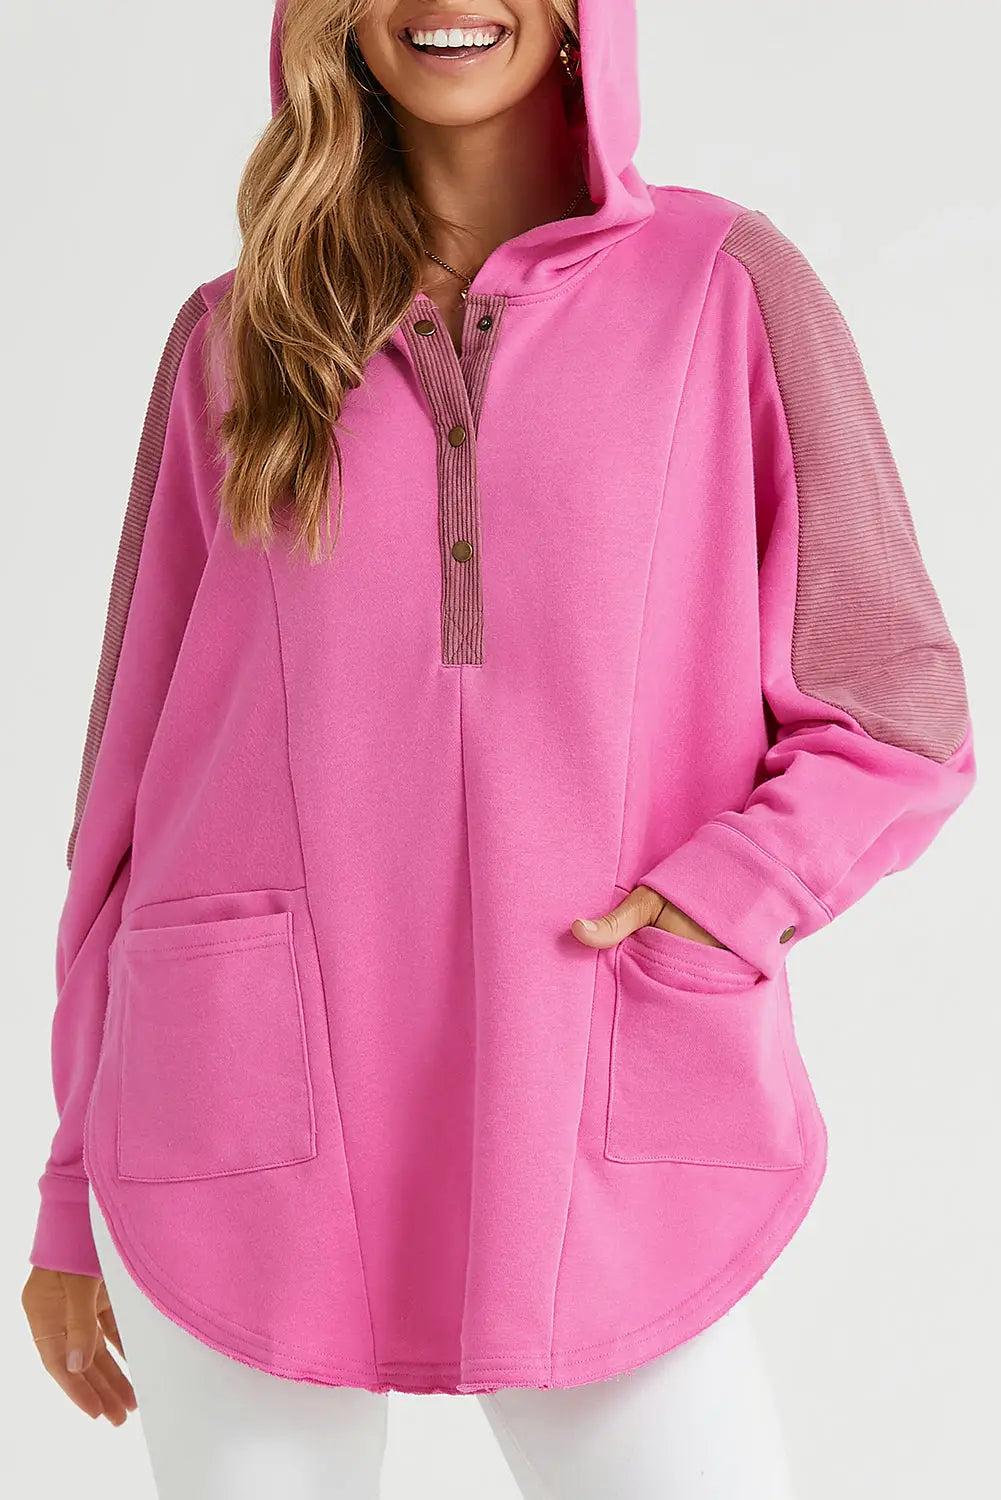 Sky blue patchwork side pockets oversized henley hoodie - rose / s / 65% polyester + 35% cotton - sweatshirts & hoodies